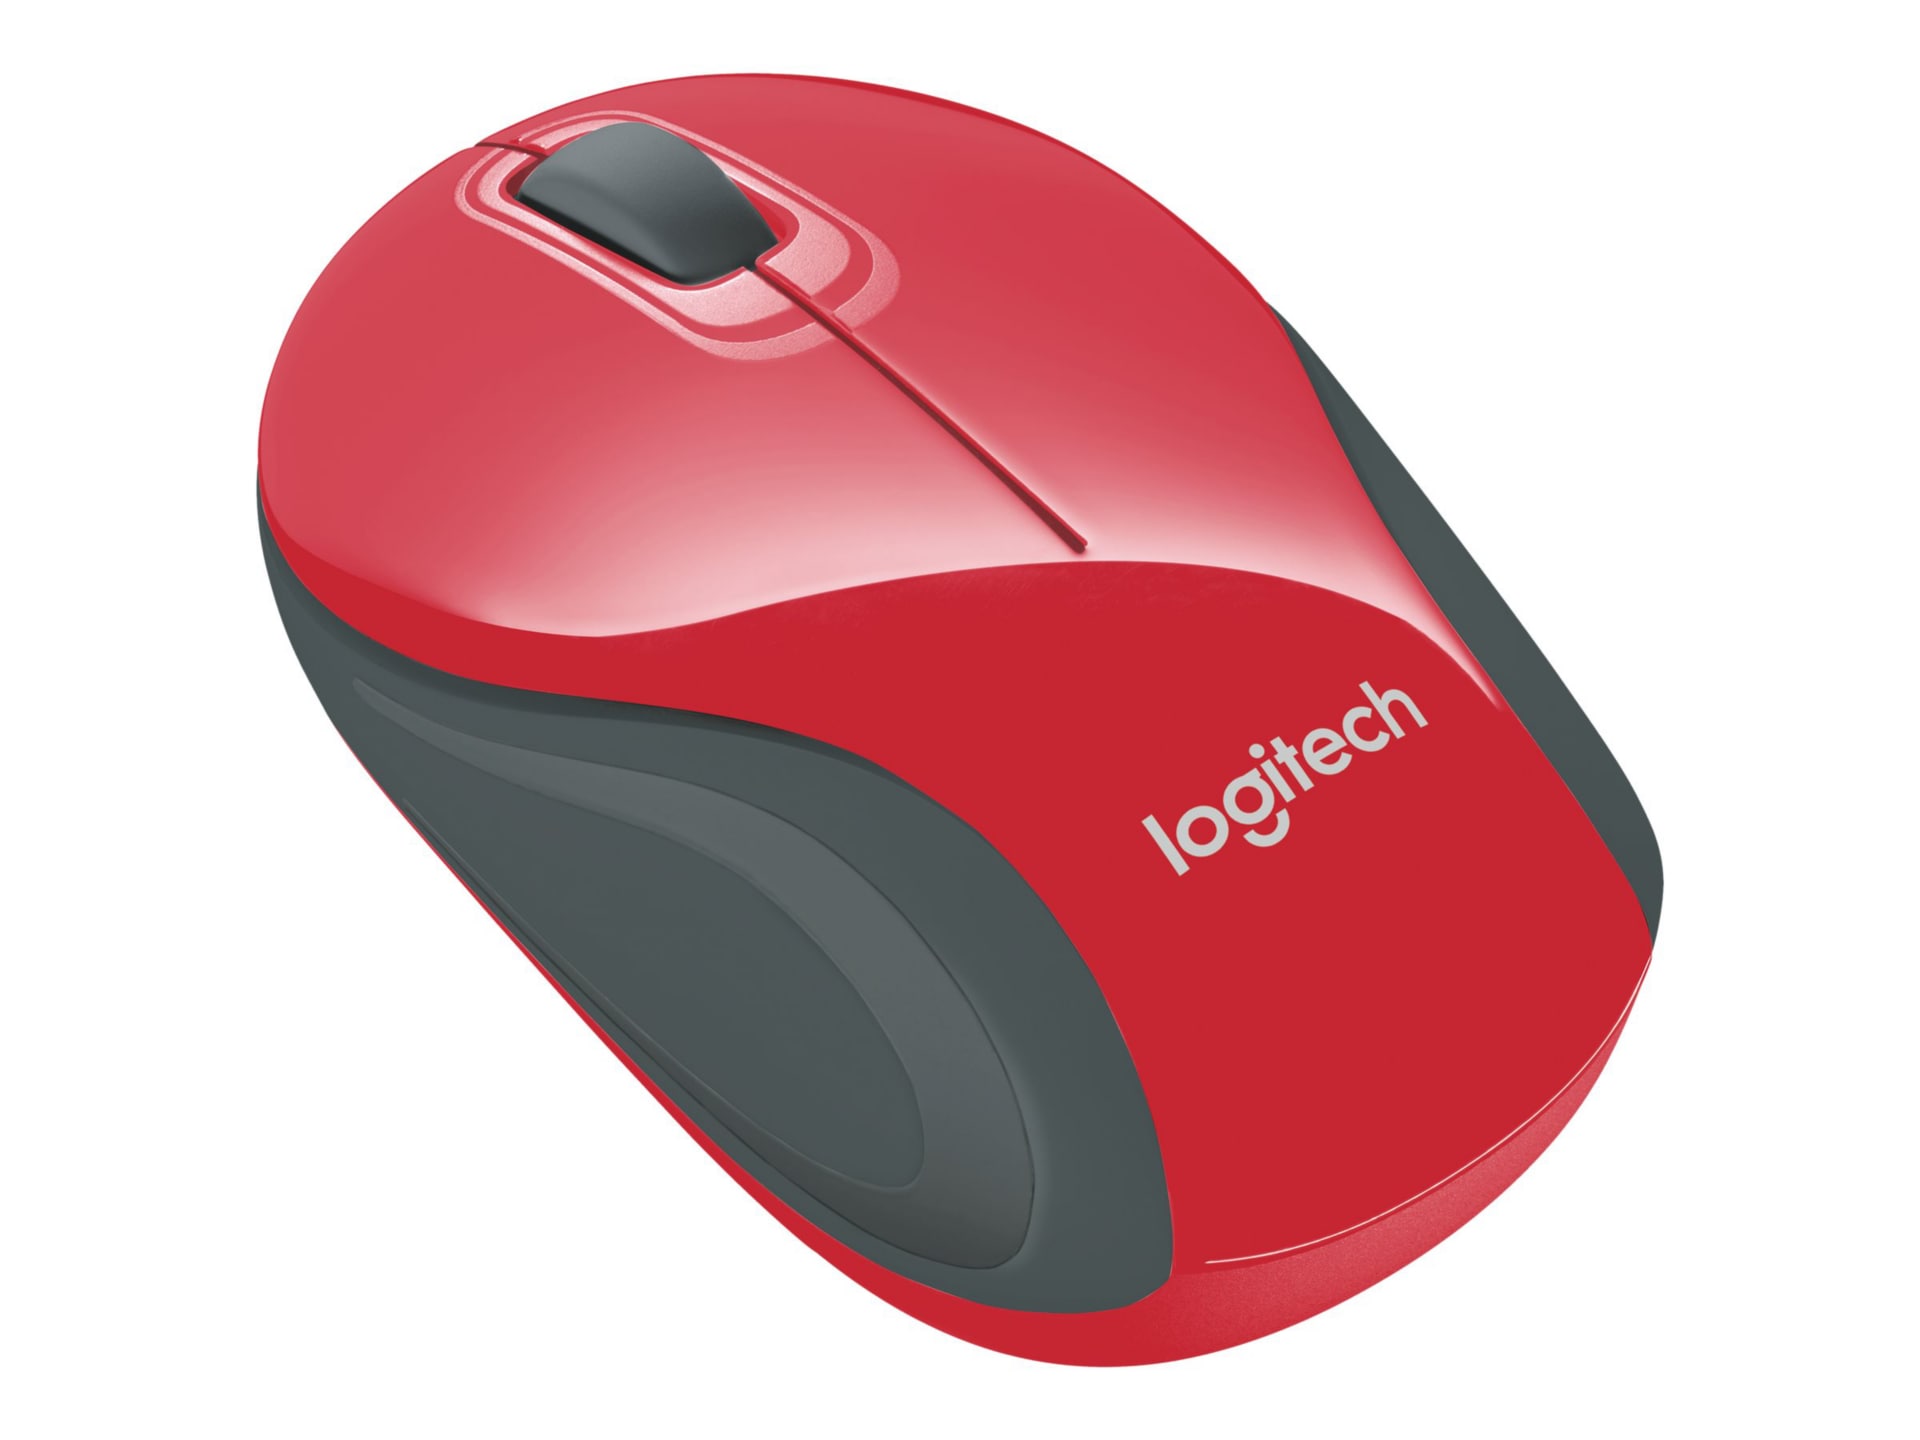 - - M187 red 2.4 - GHz Logitech mouse Mice - - 910-002727